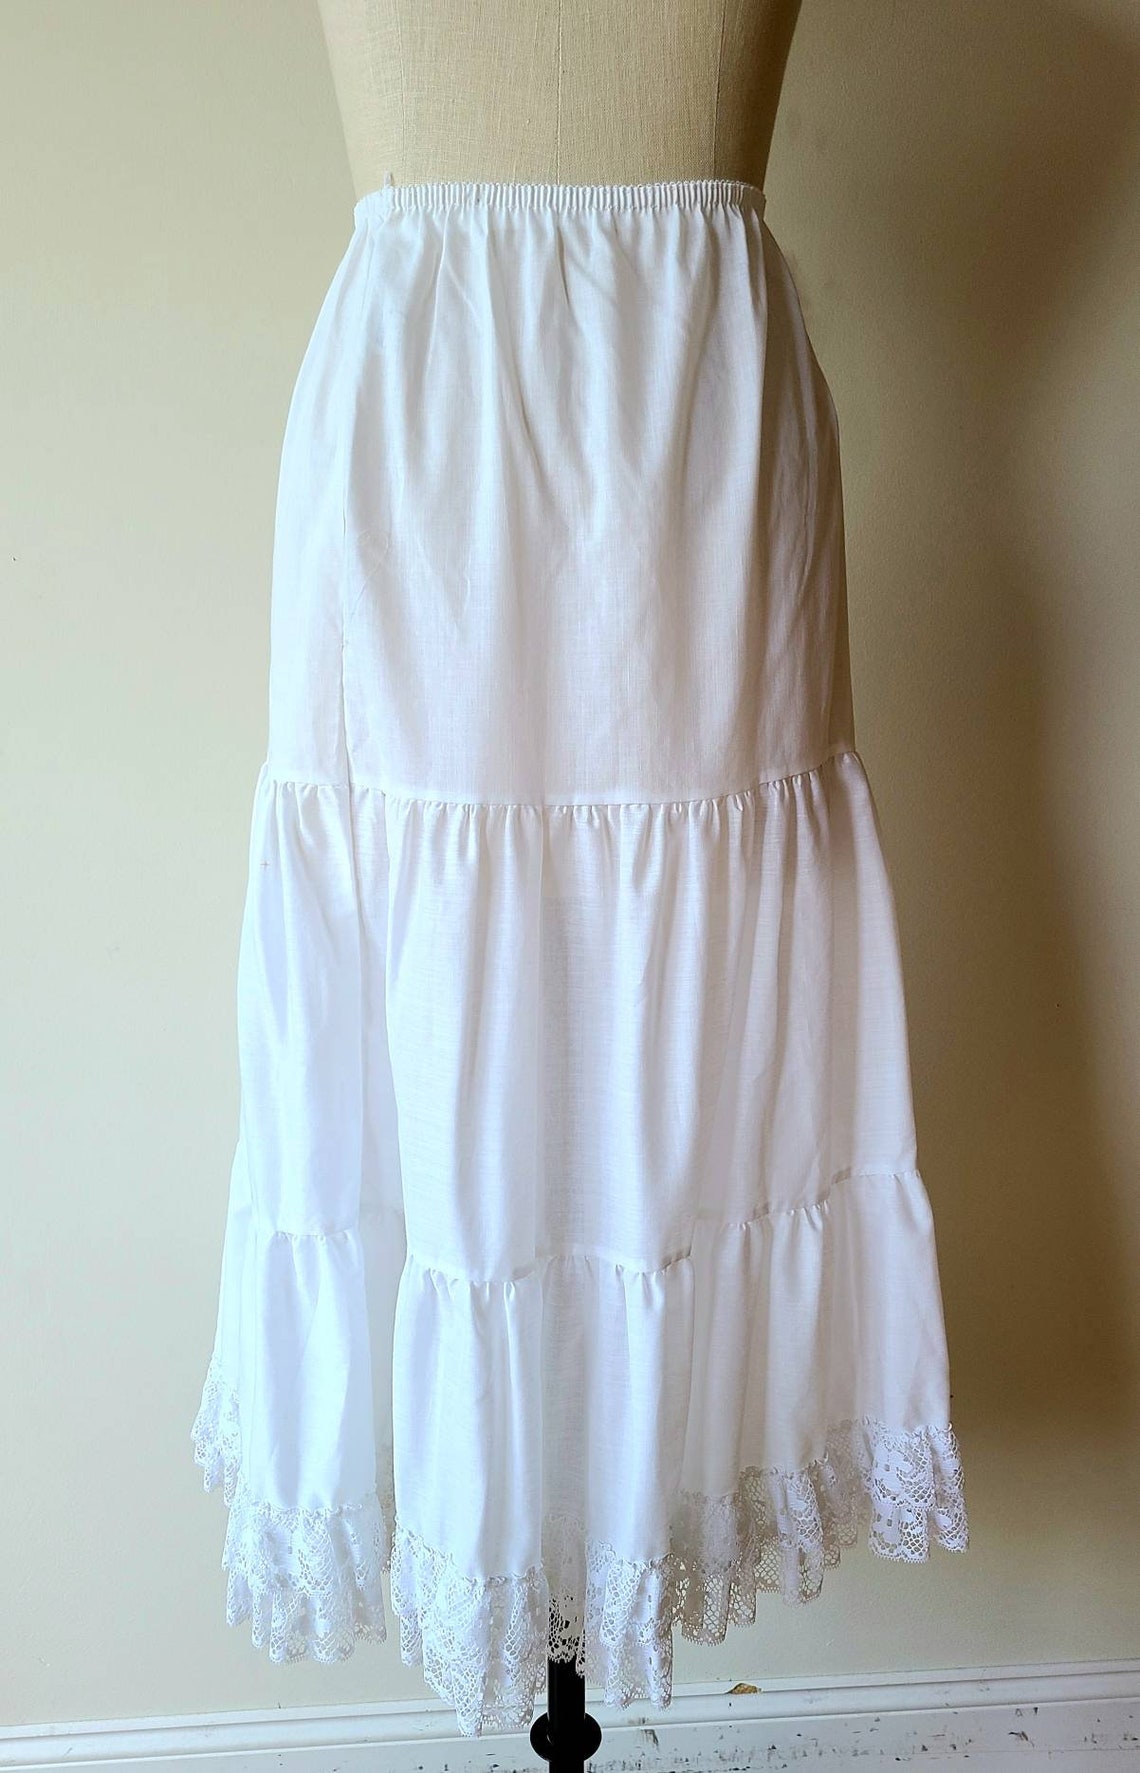 Vintage half slip/ cotton tiered ruffled lace trimmed slip/ | Etsy